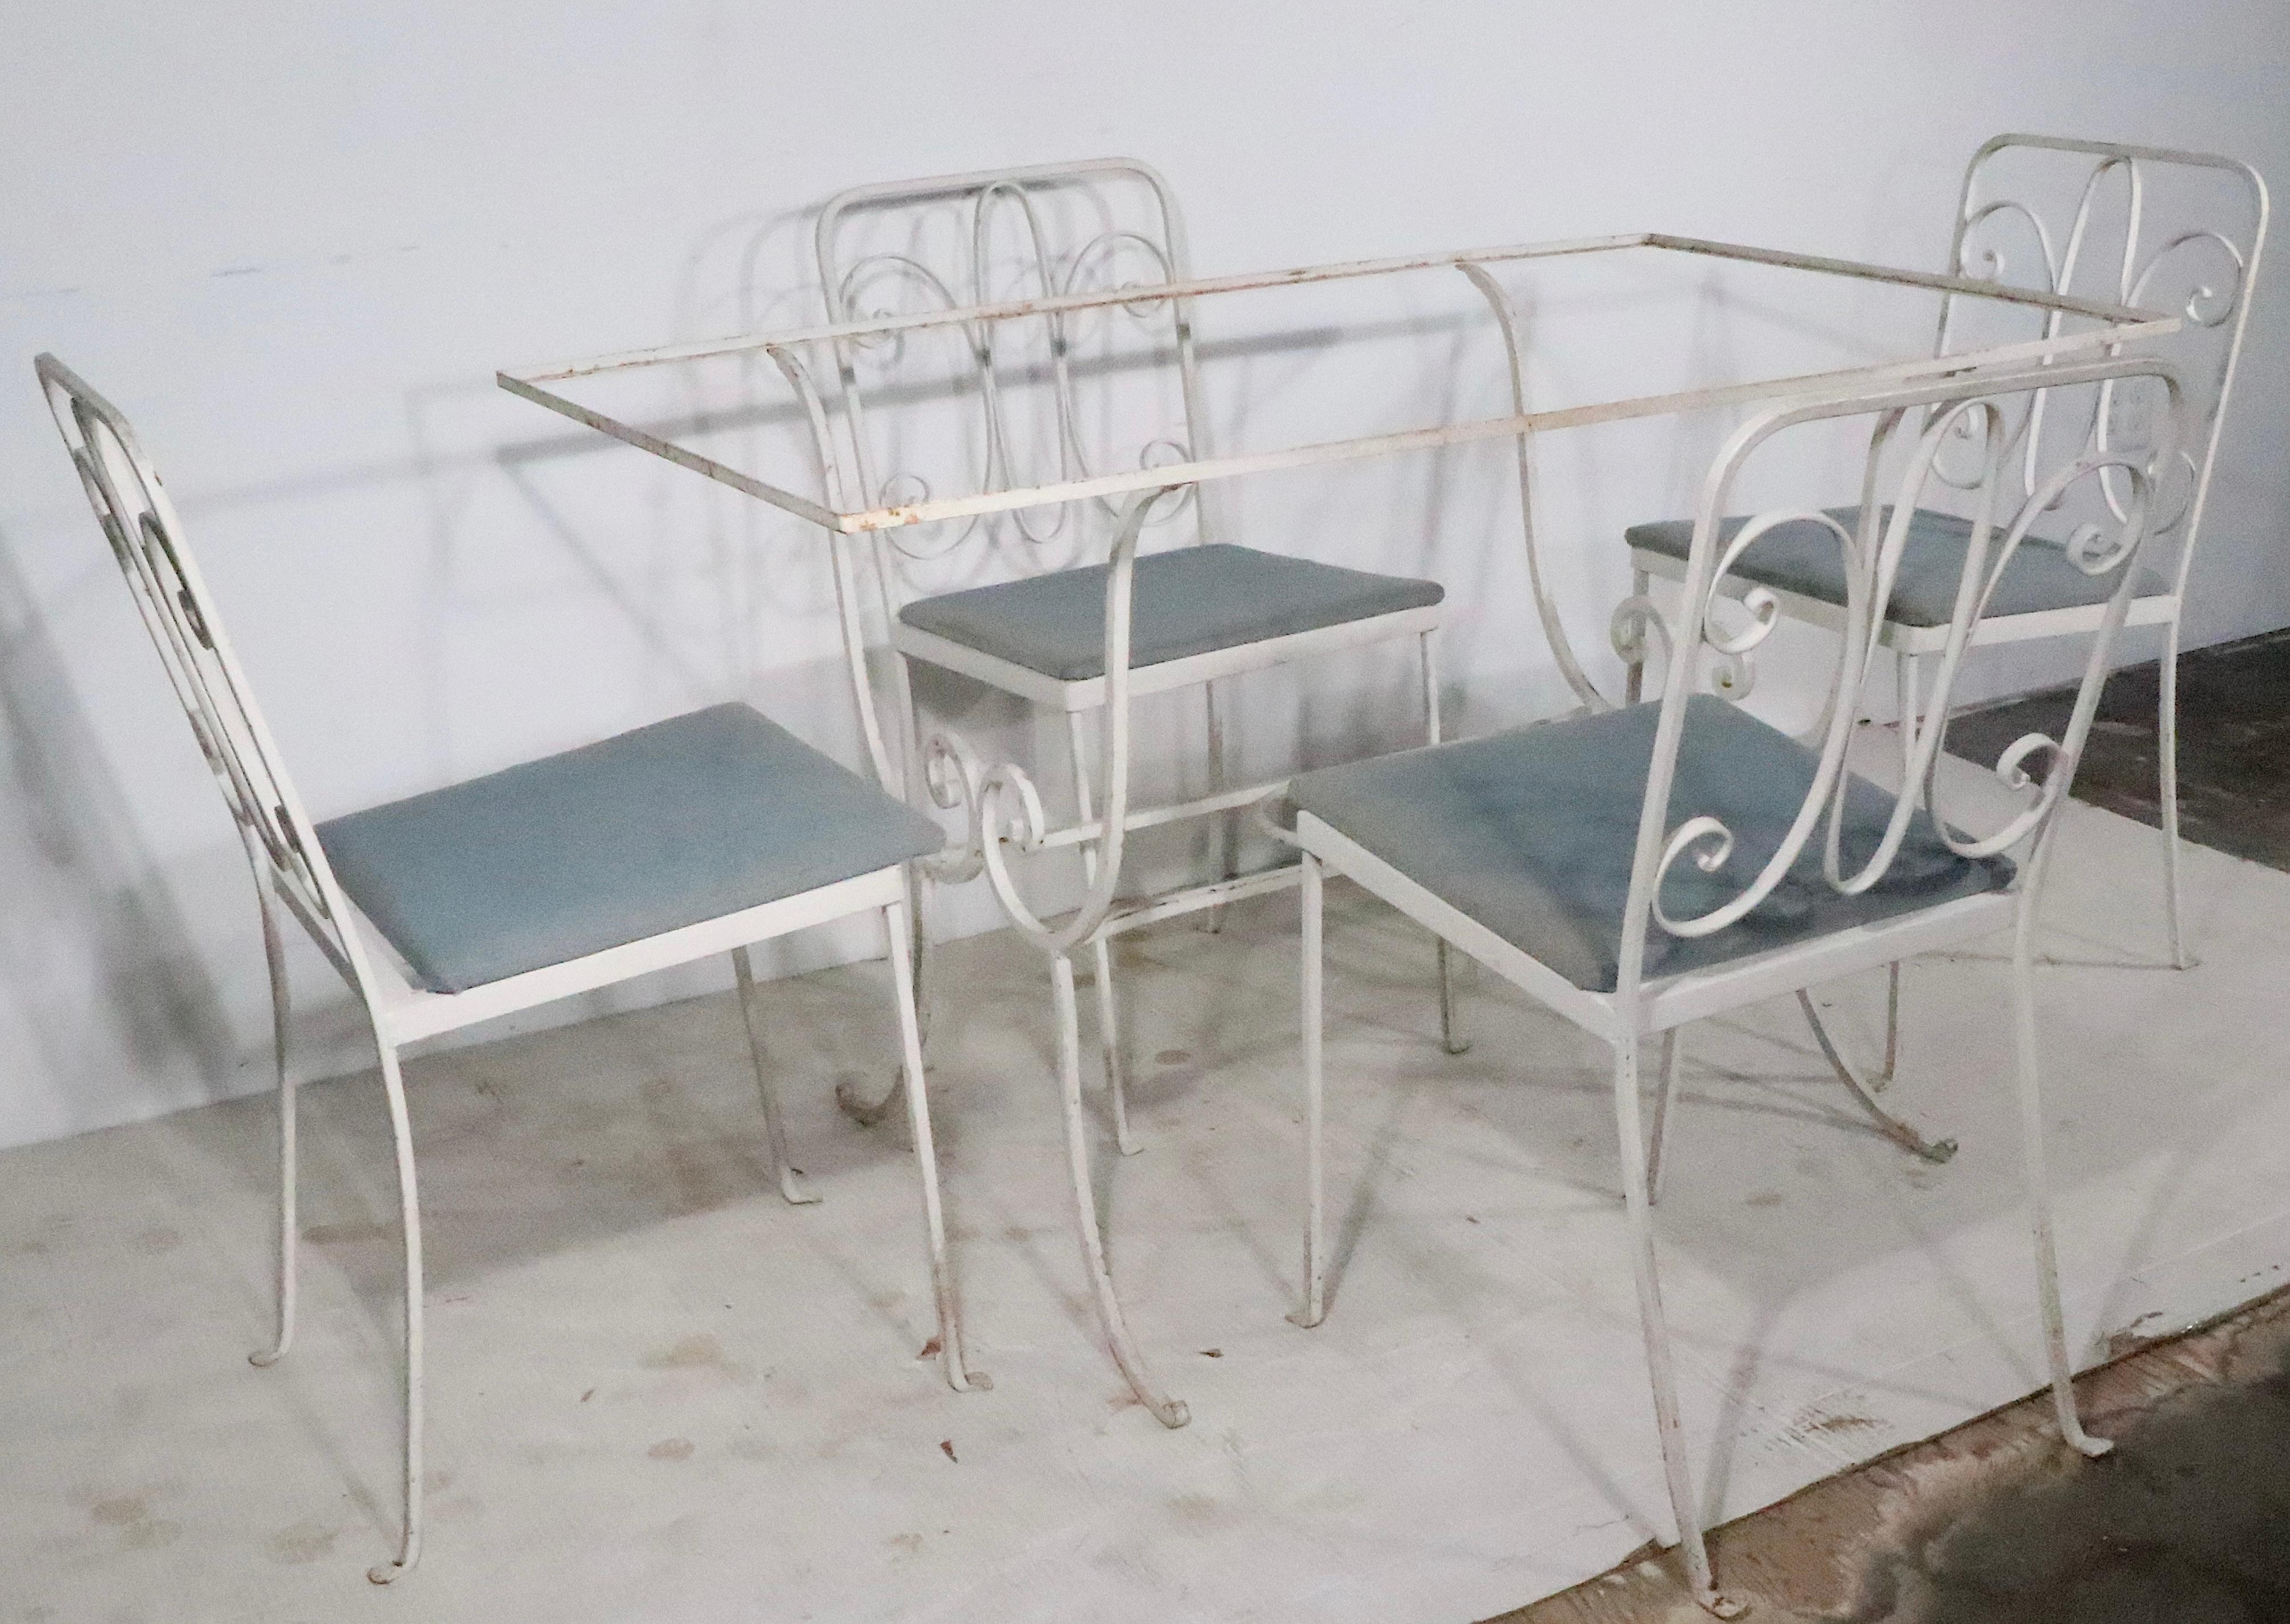 5pc. Art Deco Wrought Iron Patio Garden Poolside Dining Set c 1930's For Sale 1